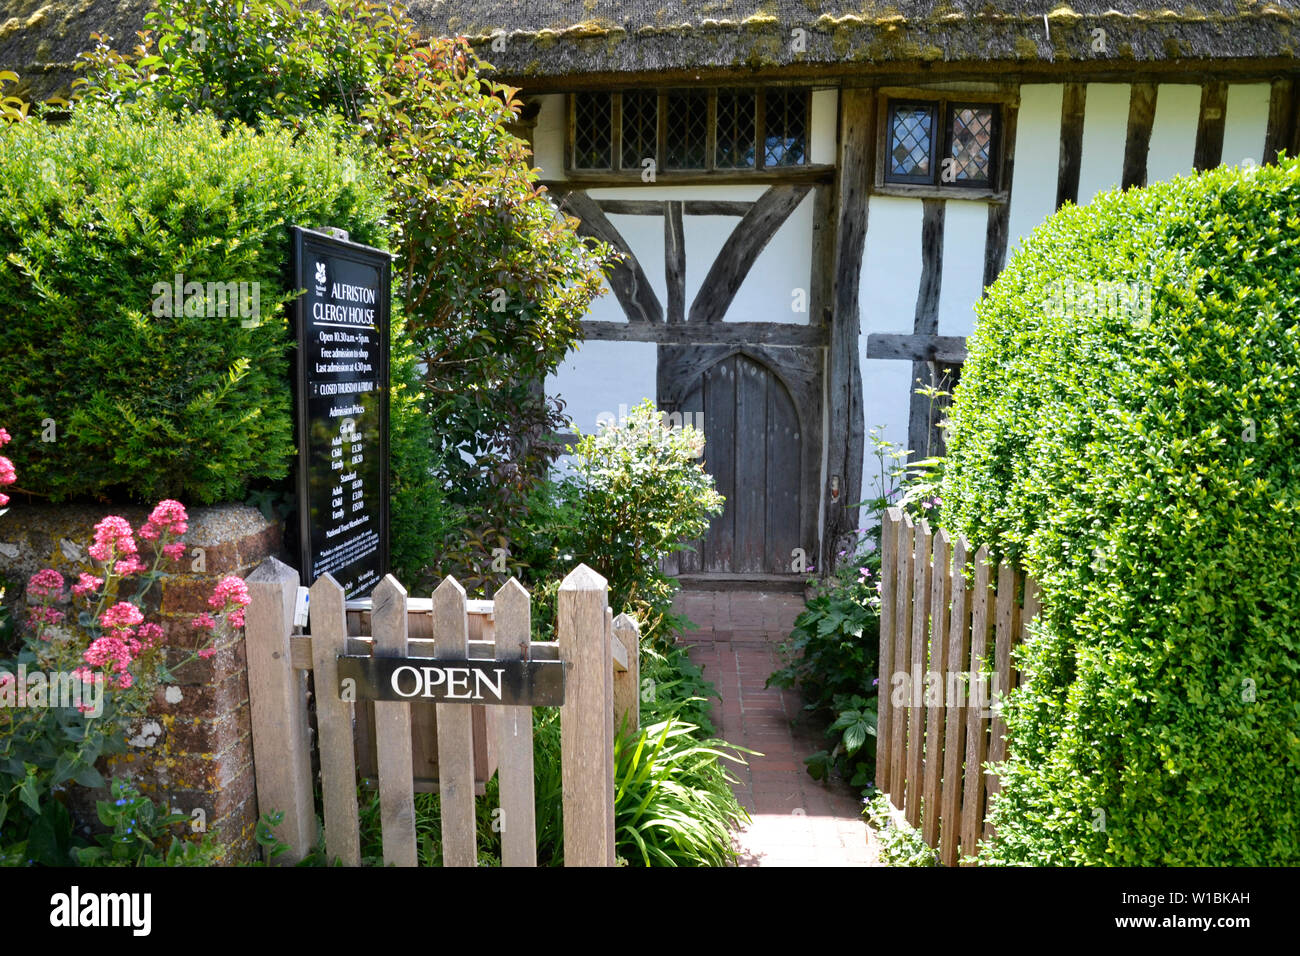 View of Alfriston Clergy House, Alfriston, East Sussex, UK Stock Photo